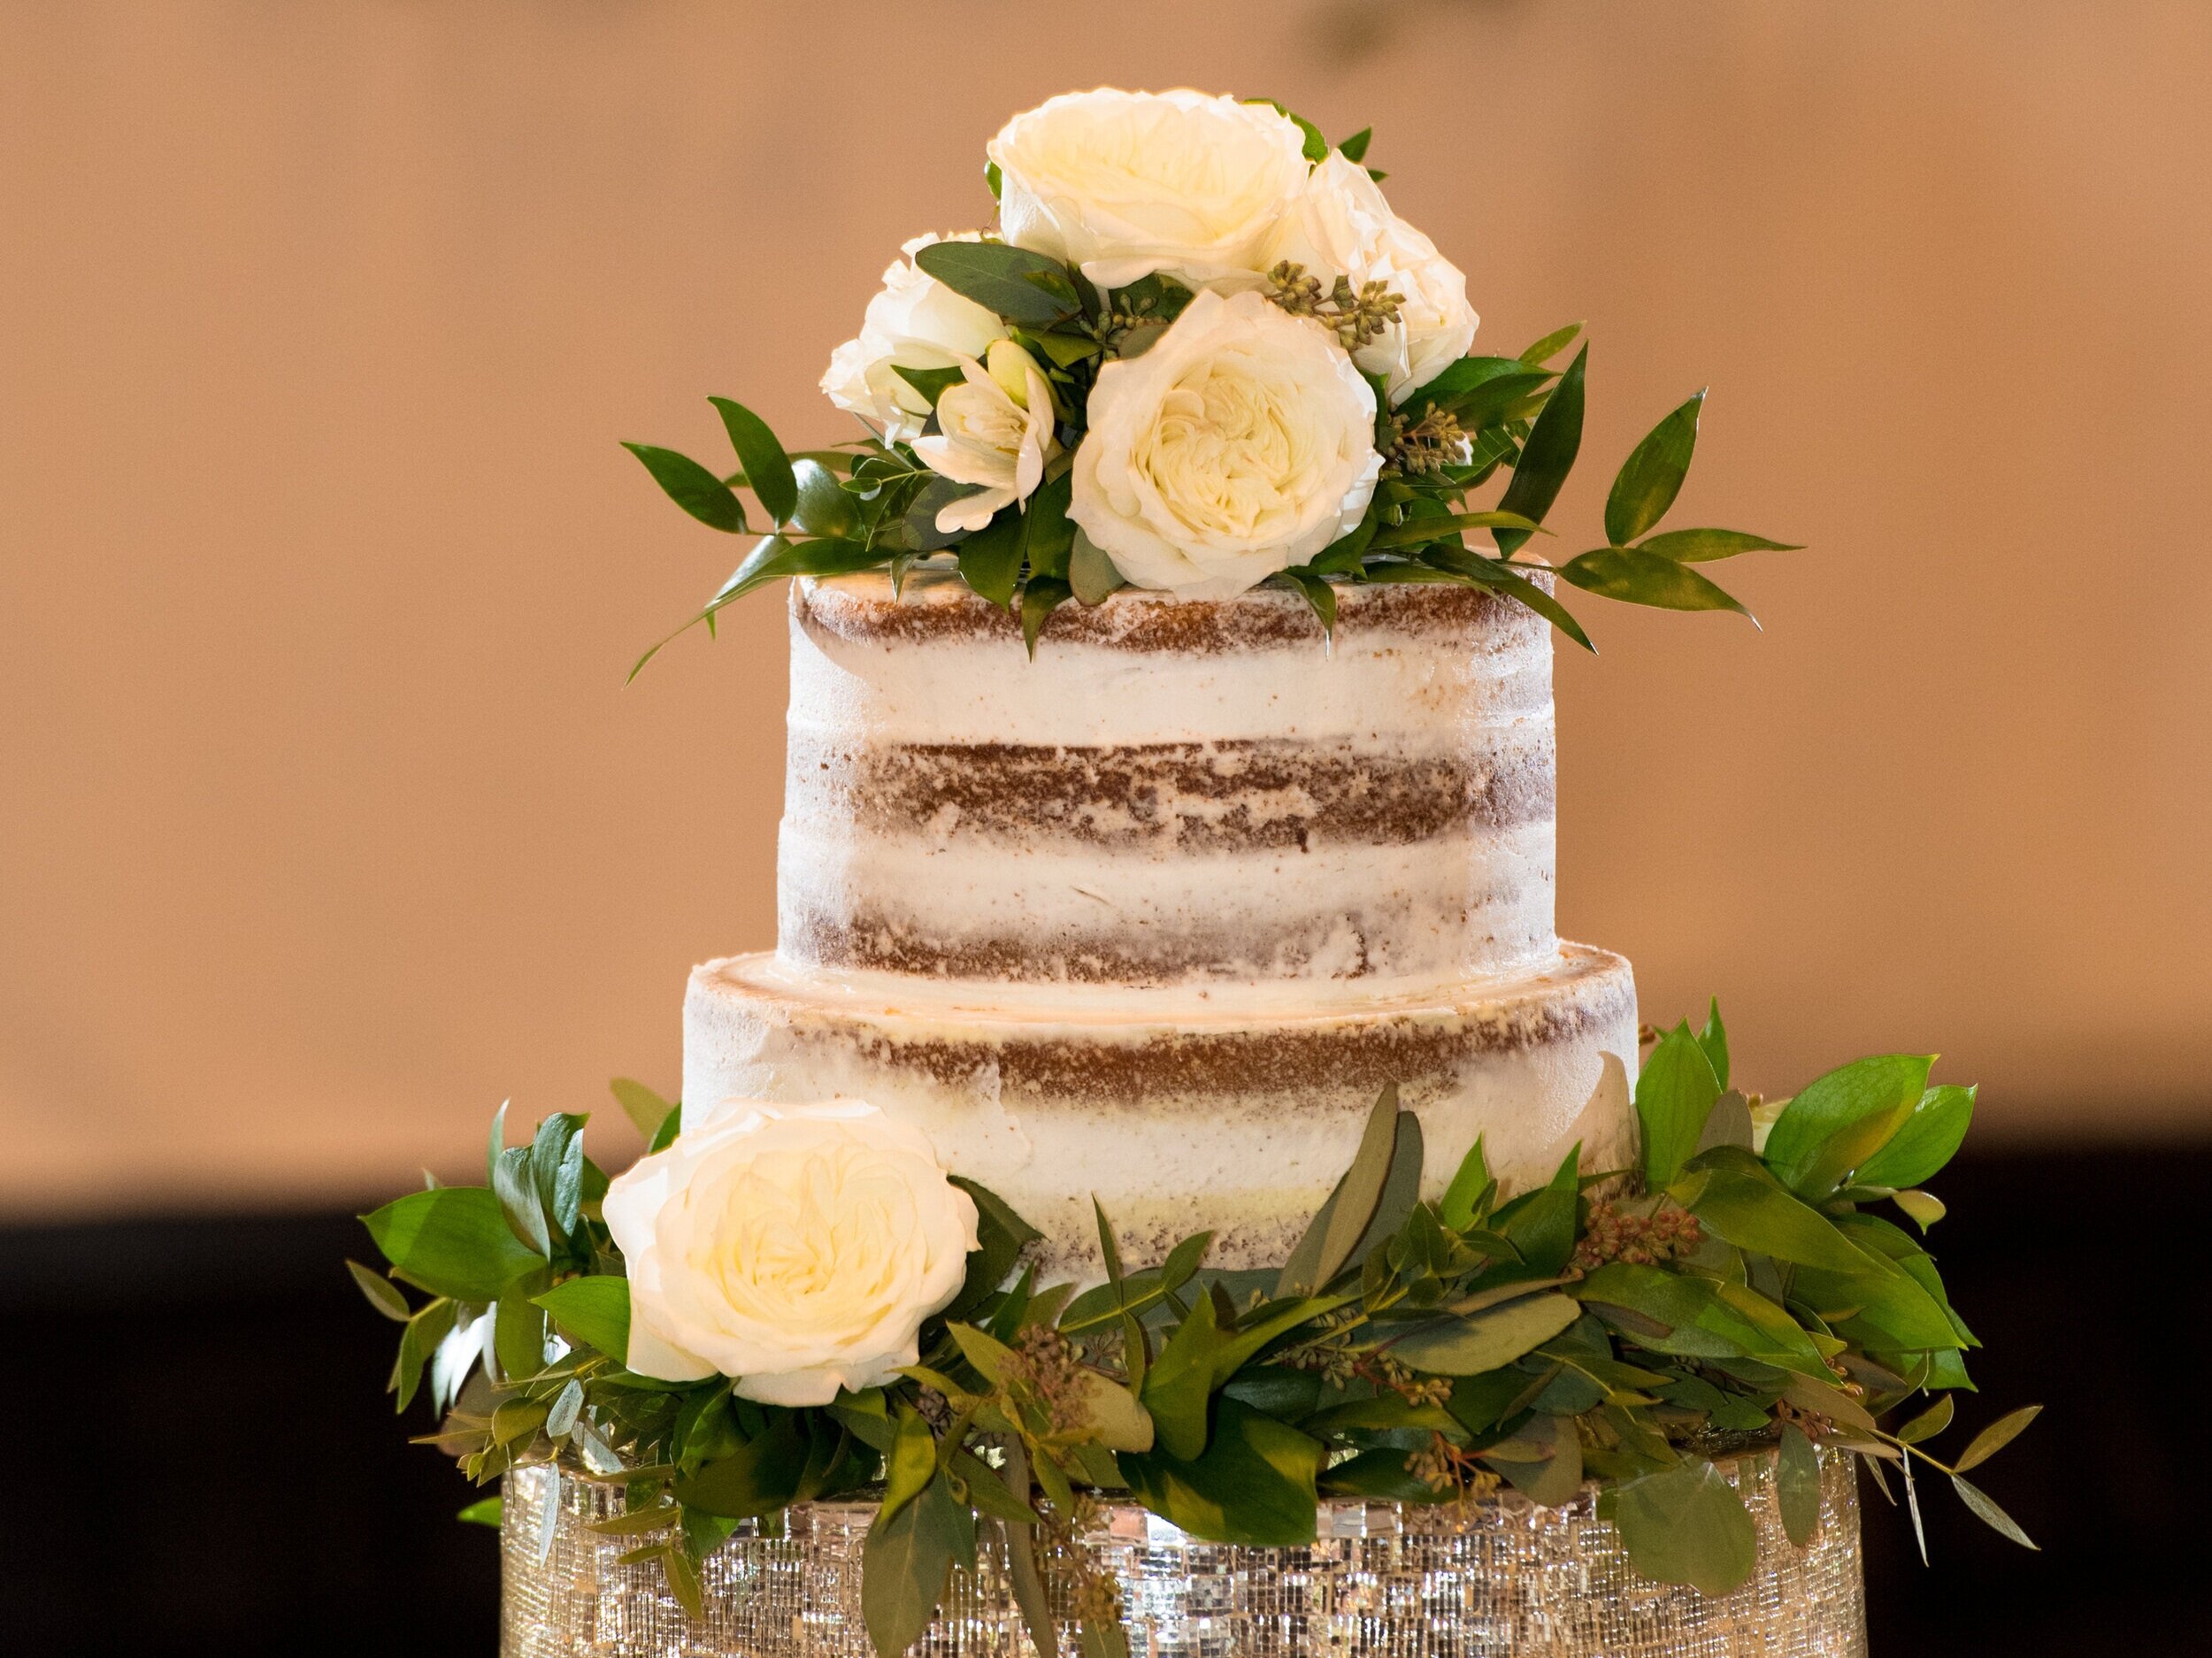 A Simply Sweet cake captured by William James Photography .